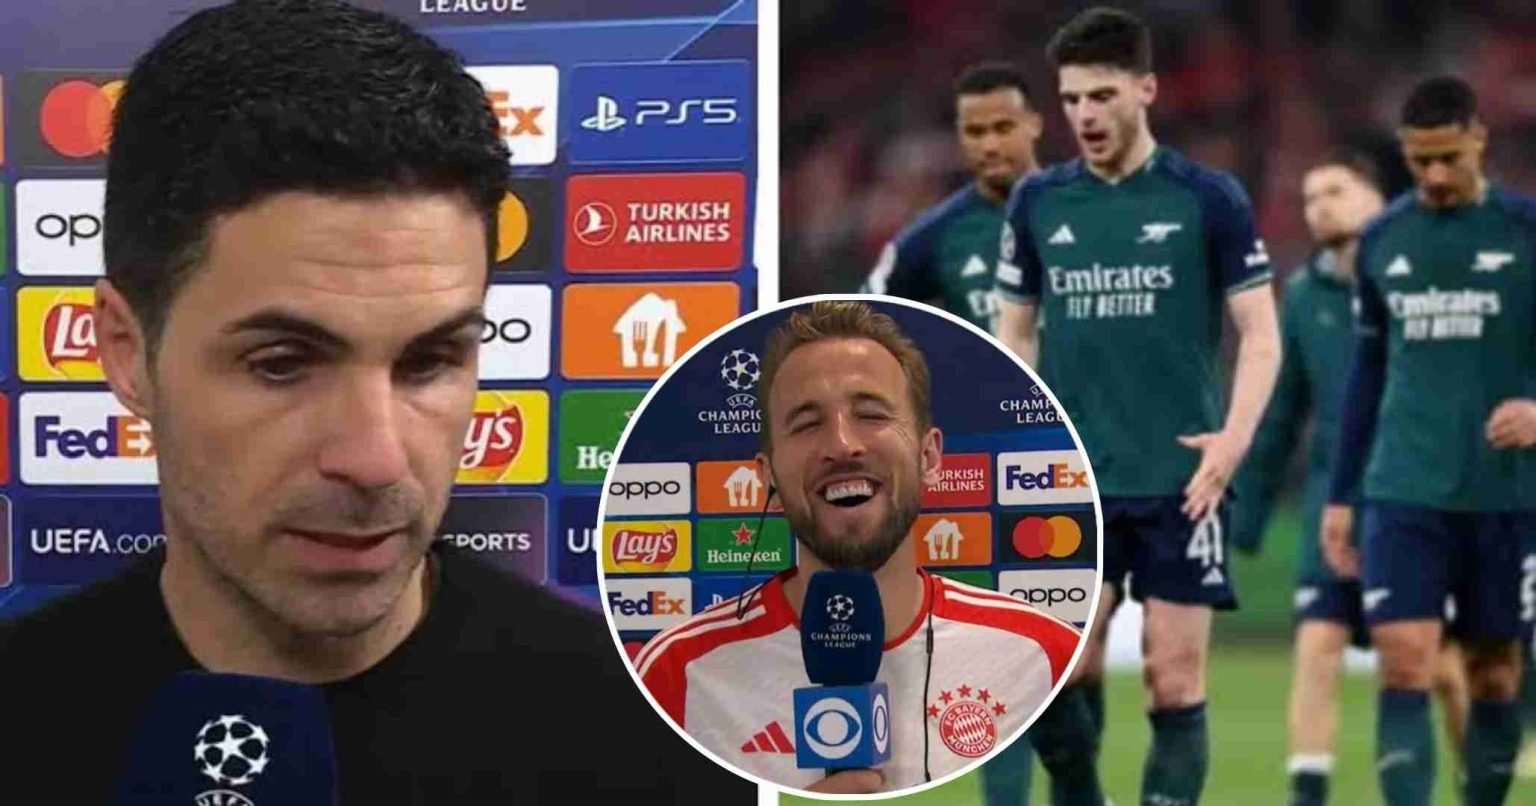 Mikel Arteta tells Thomas Tuchel and Harry Kane WHY mediocre Bayern Munich were able to narrowly defeat Arsenal as he admits reason behind Gunners eliminations from the Champions League